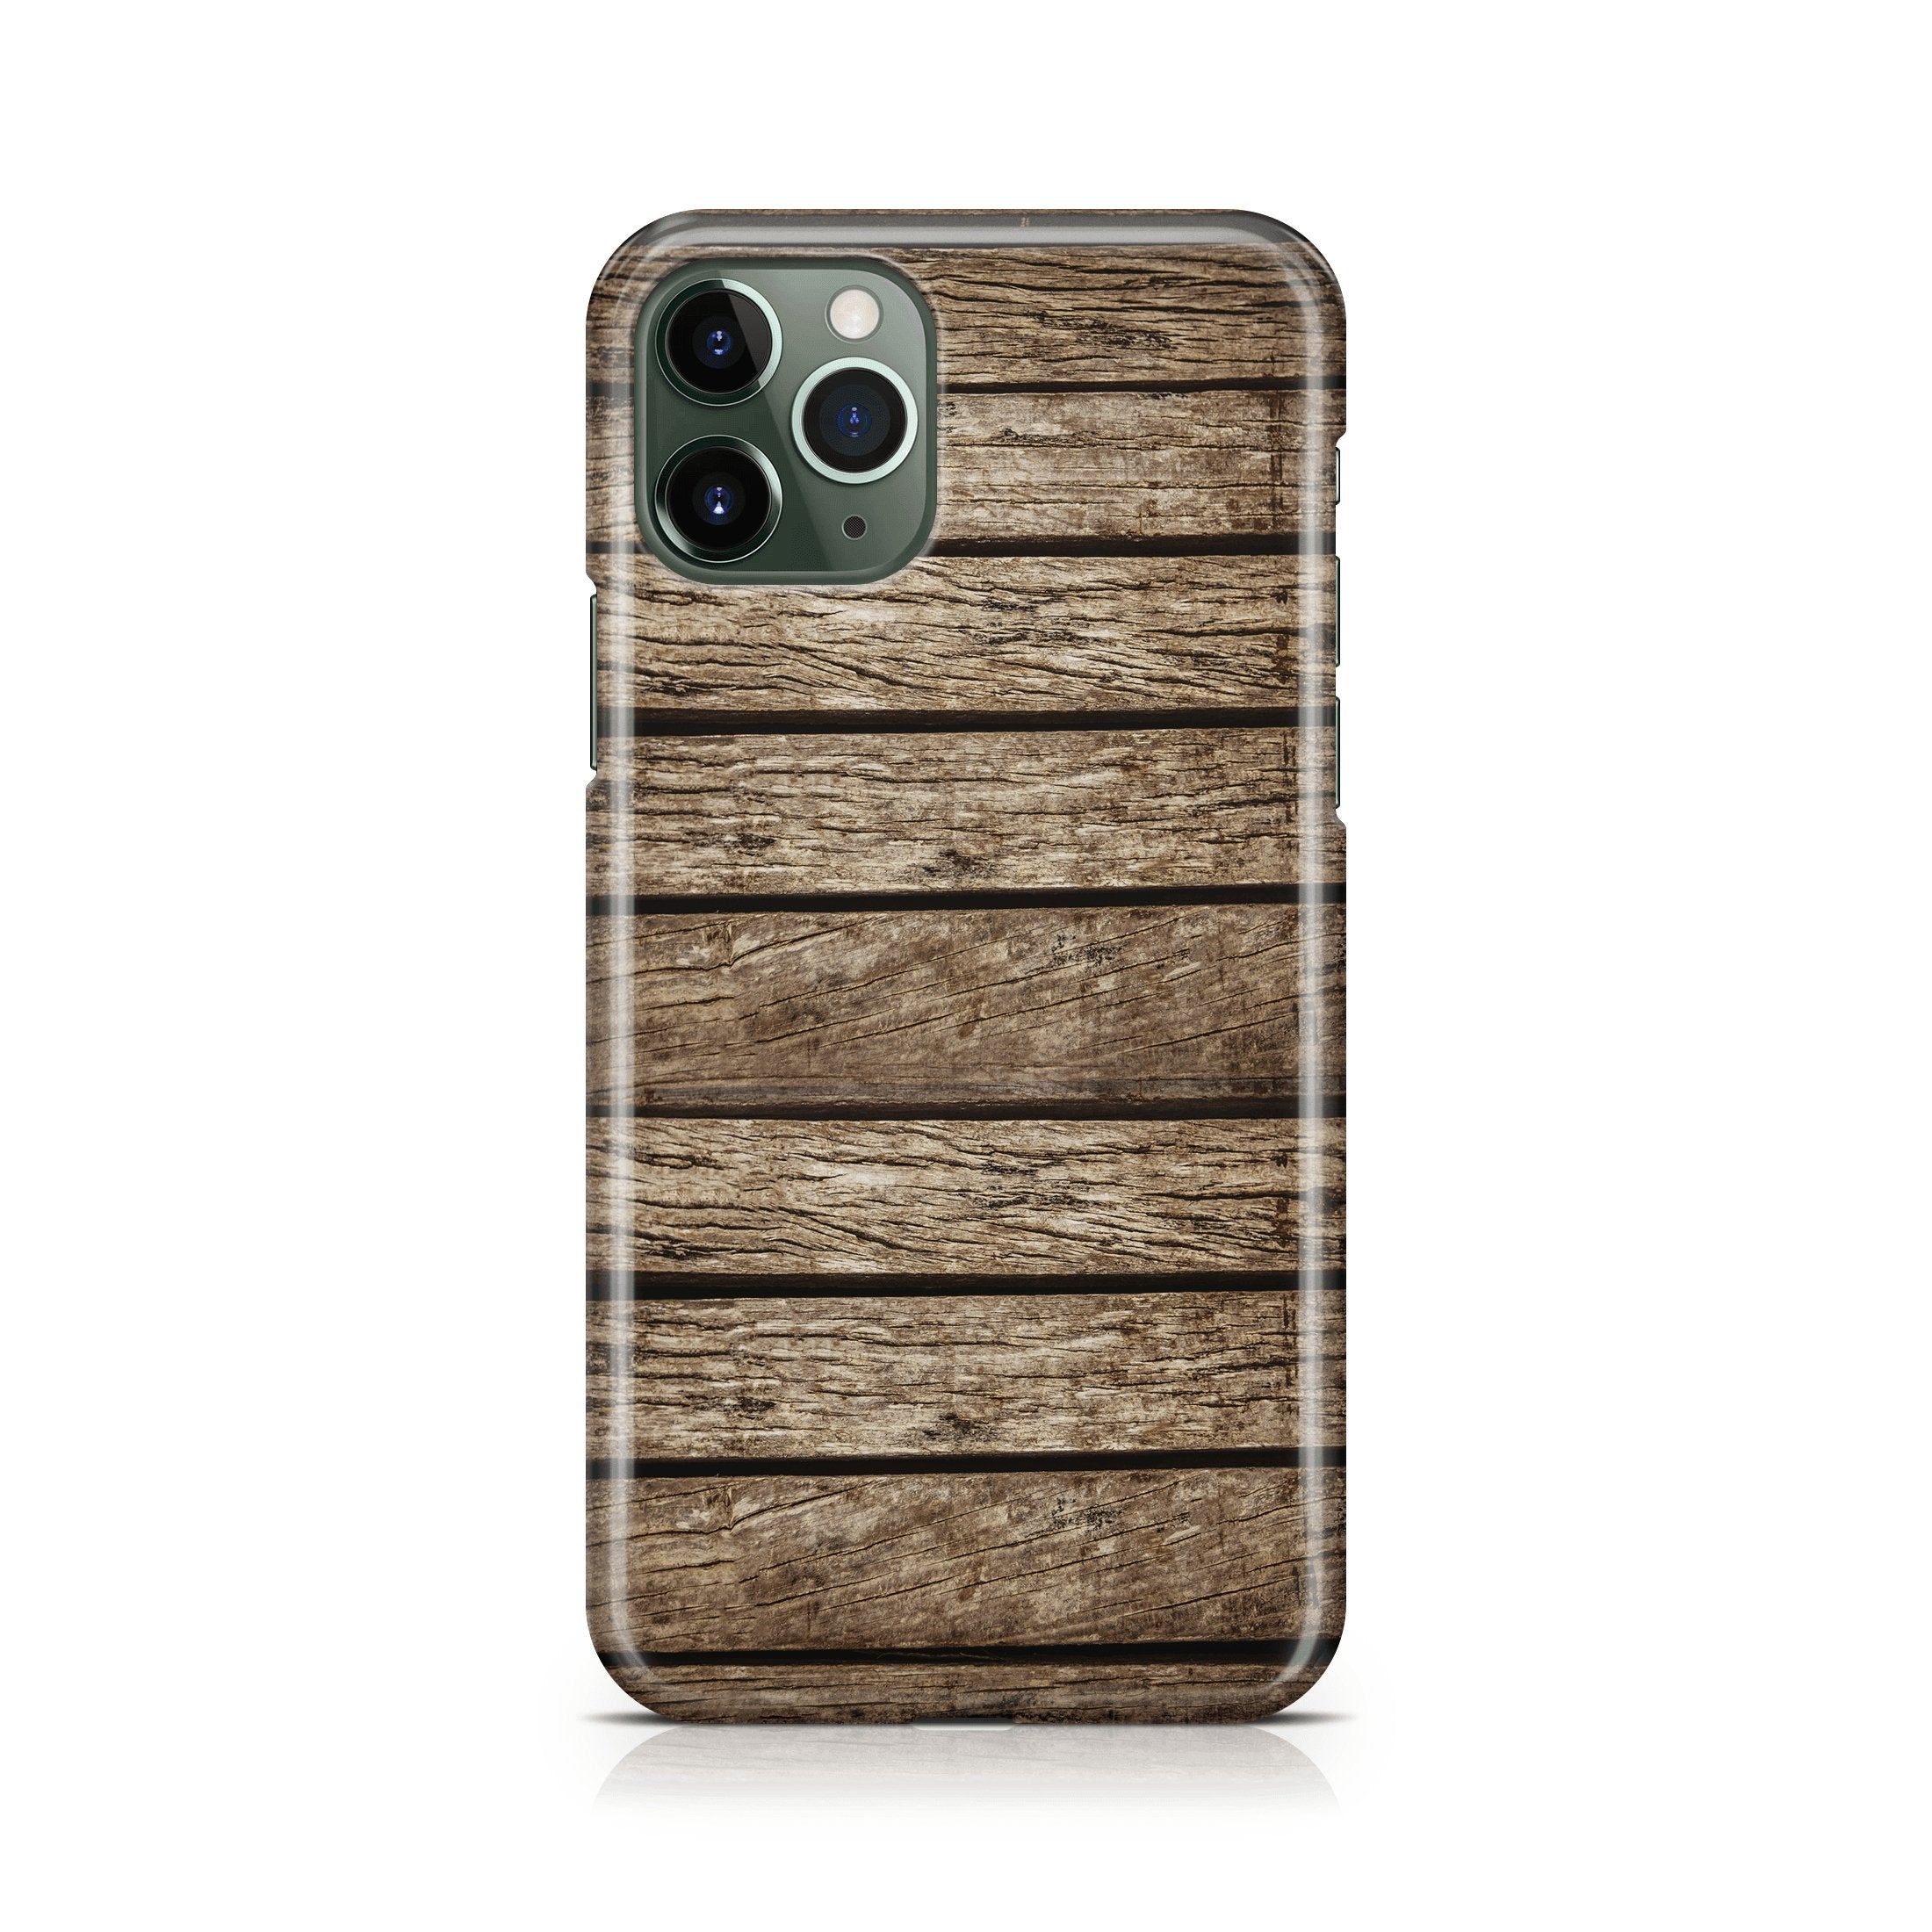 Rustic Cabin - iPhone phone case designs by CaseSwagger